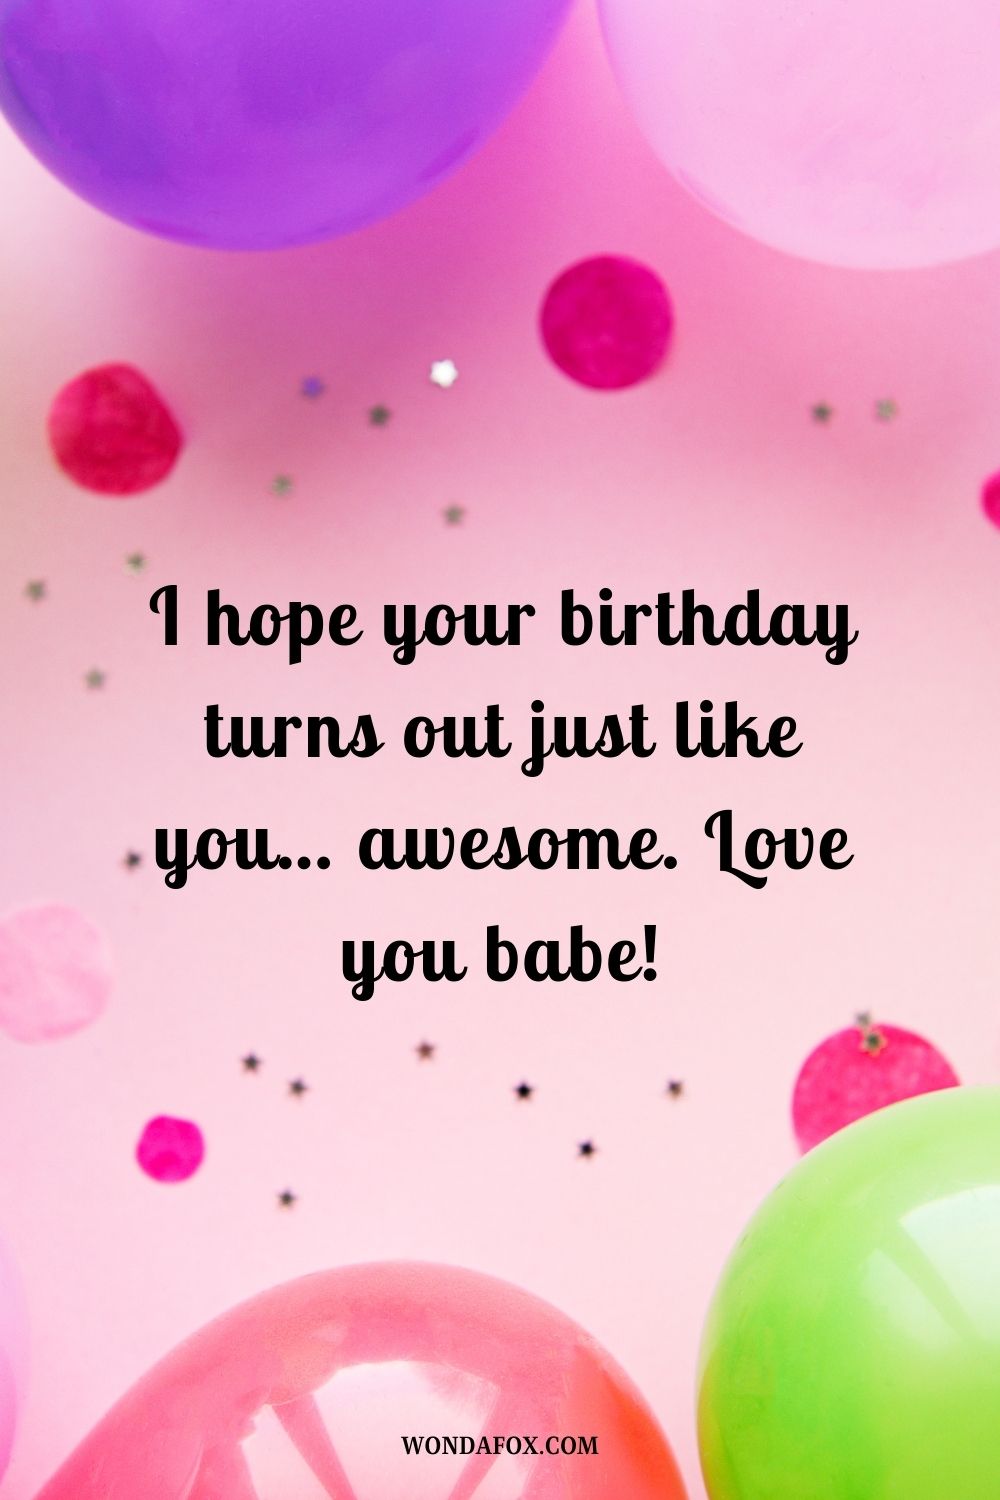 I hope your birthday turns out just like you… awesome. Love you babe!